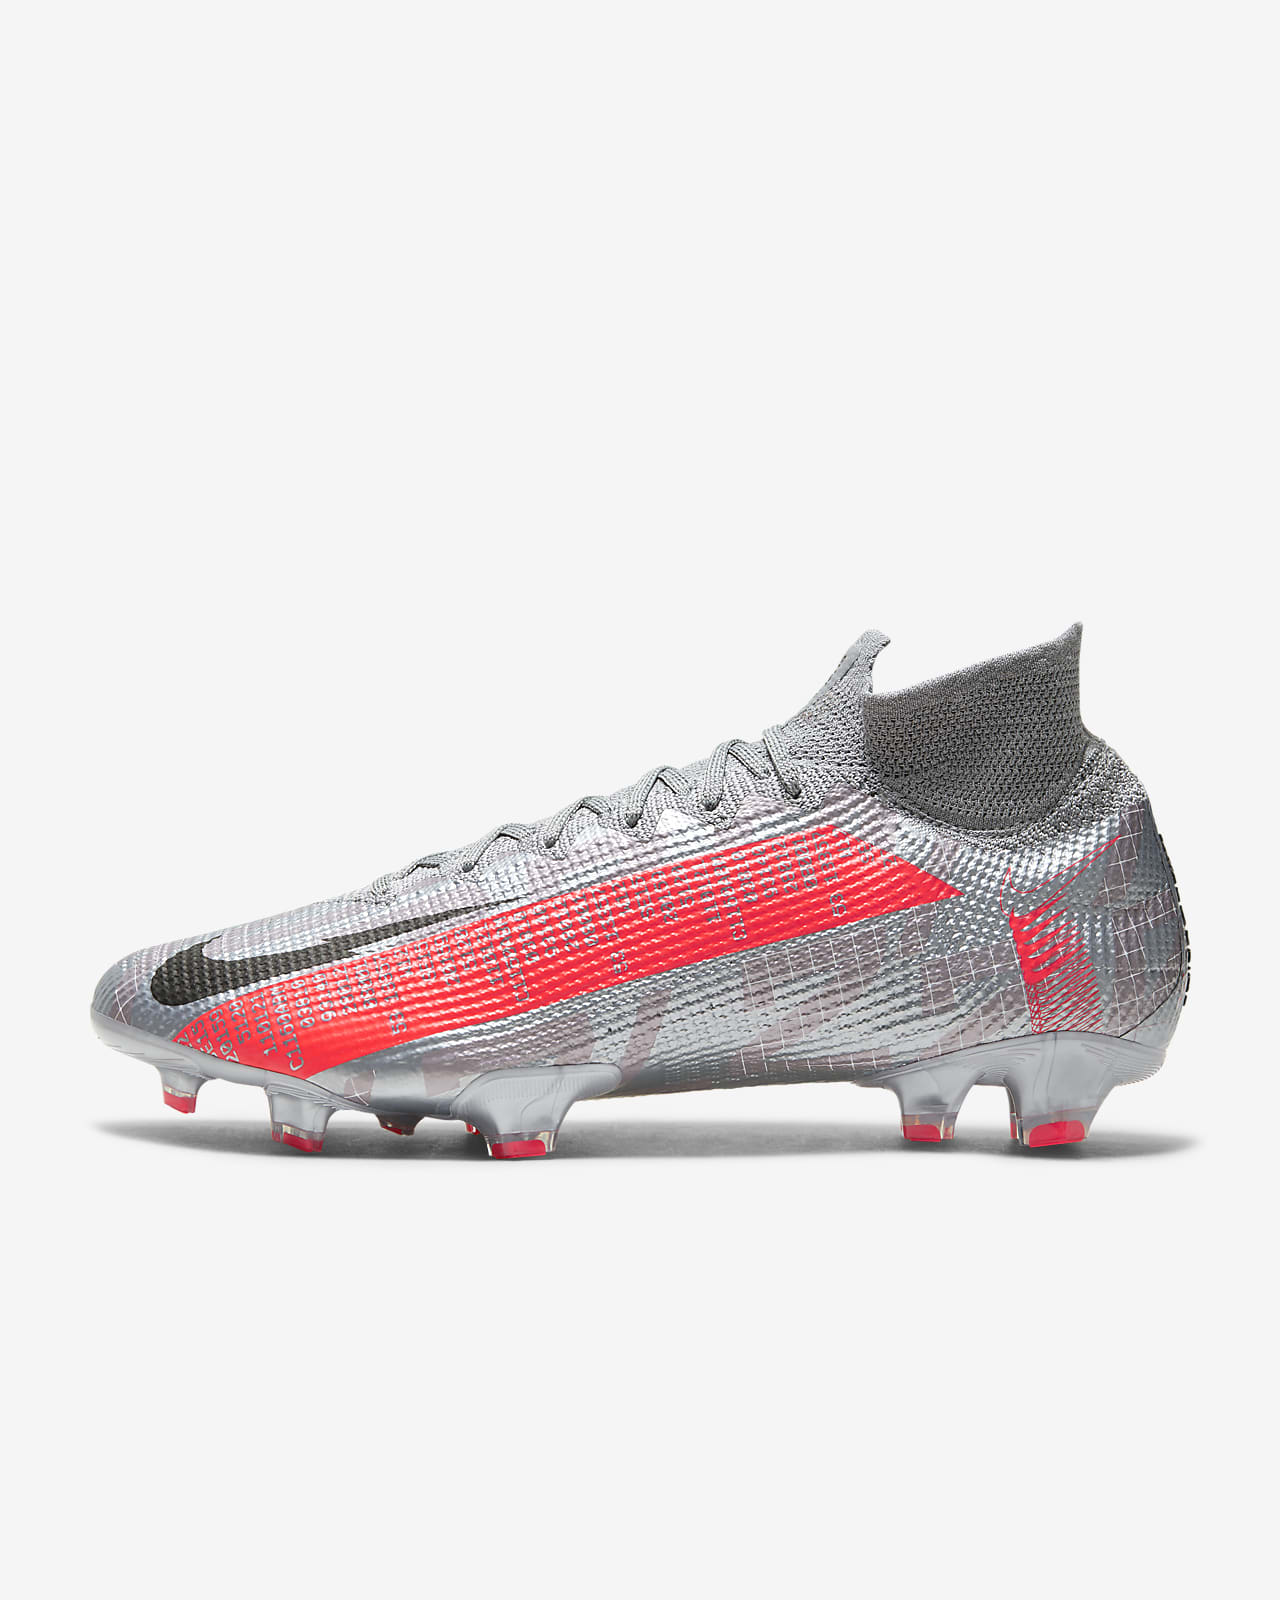 Nike Mercurial Superfly 7 Elite FG Firm-Ground Soccer Cleat. Nike JP